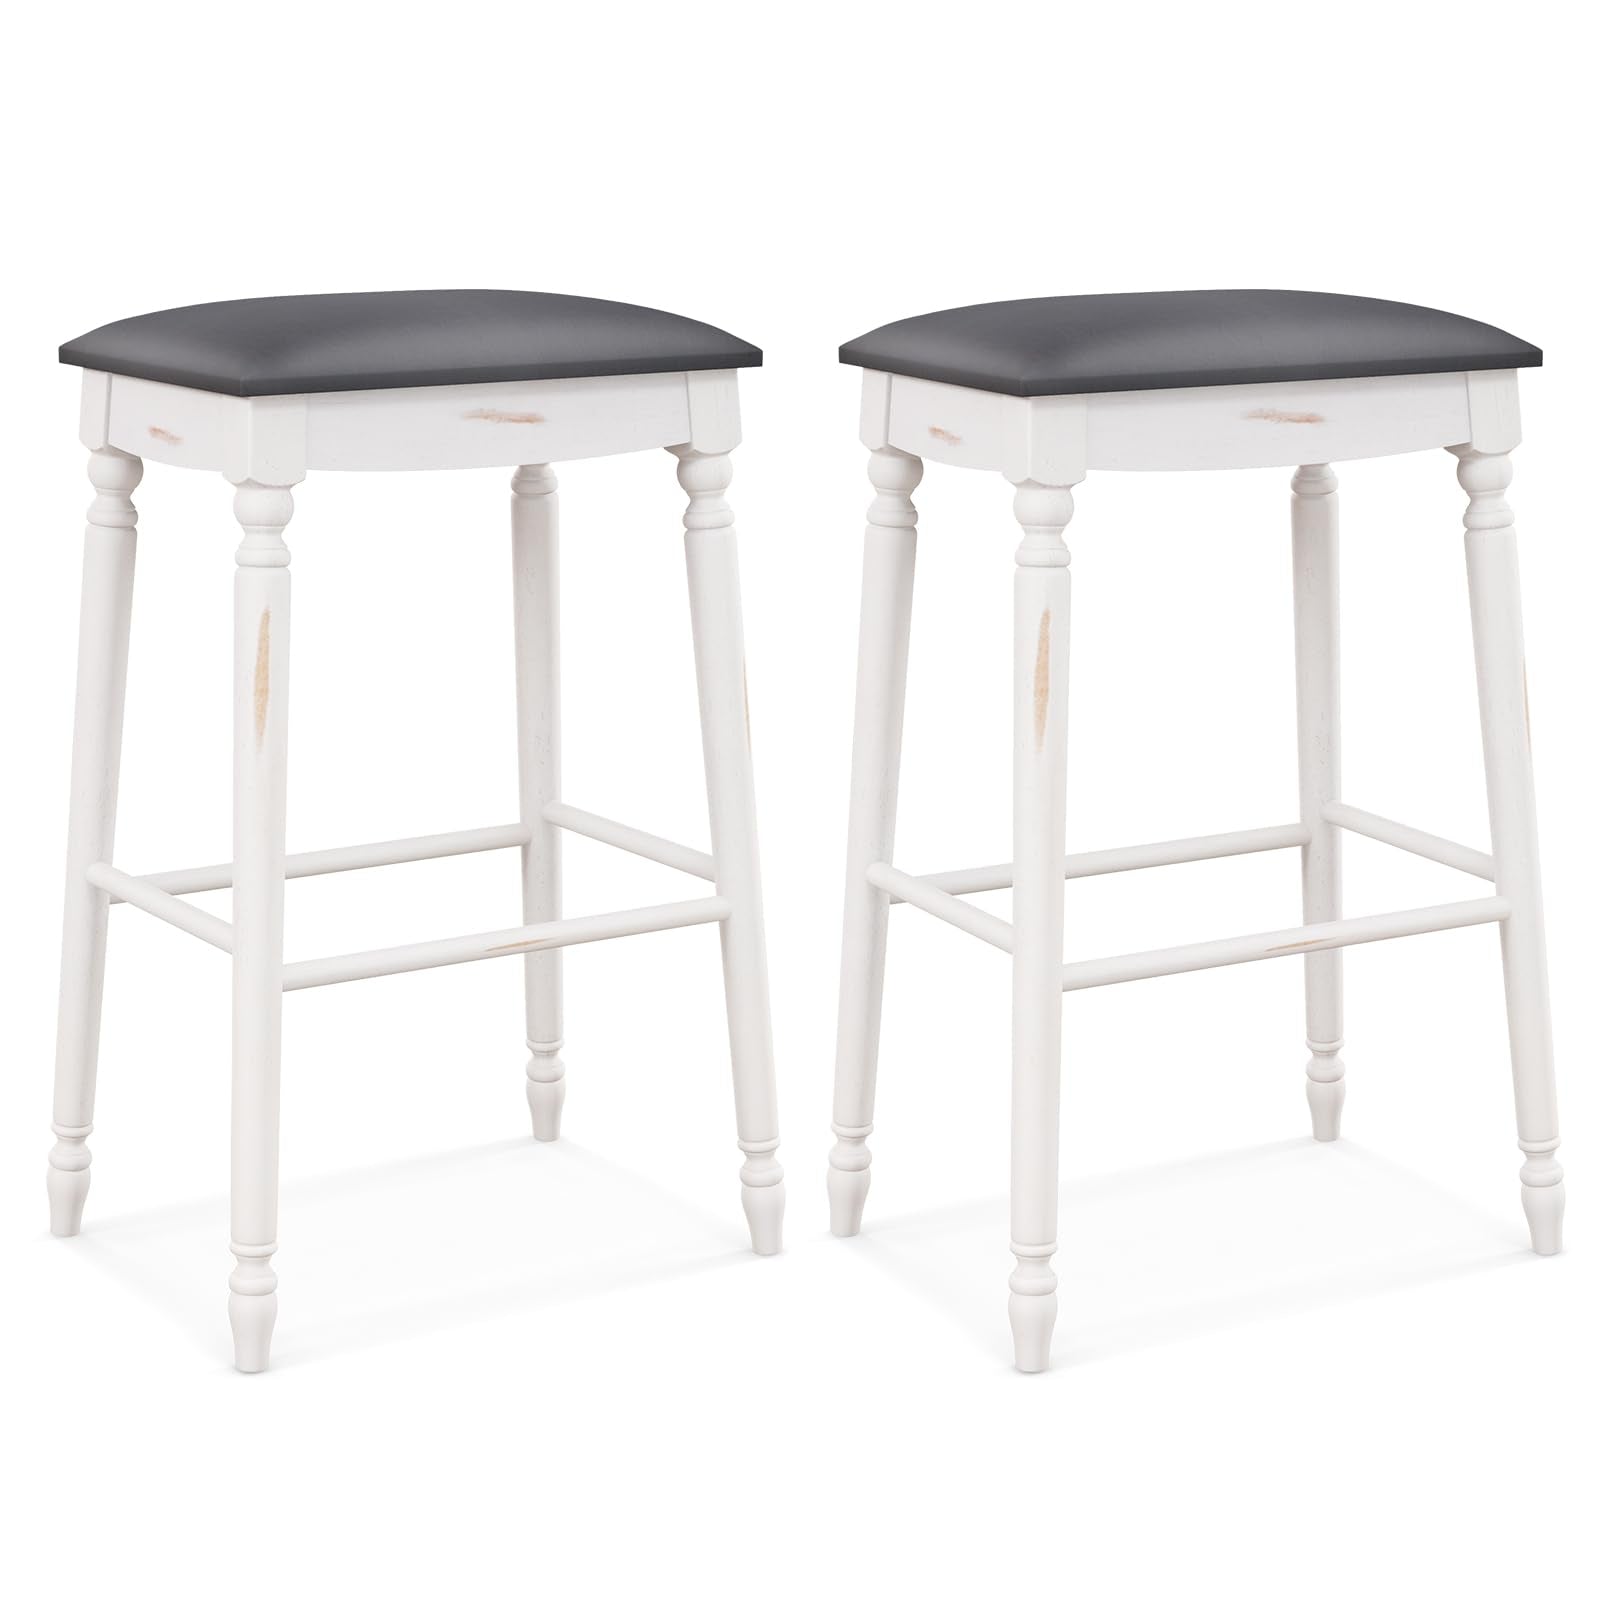 Giantex Bar Stools, 29"/24" Bar Height Saddle Stools w/Padded Seat, Rubber Wood Legs, Footrests & Antiqued Surface